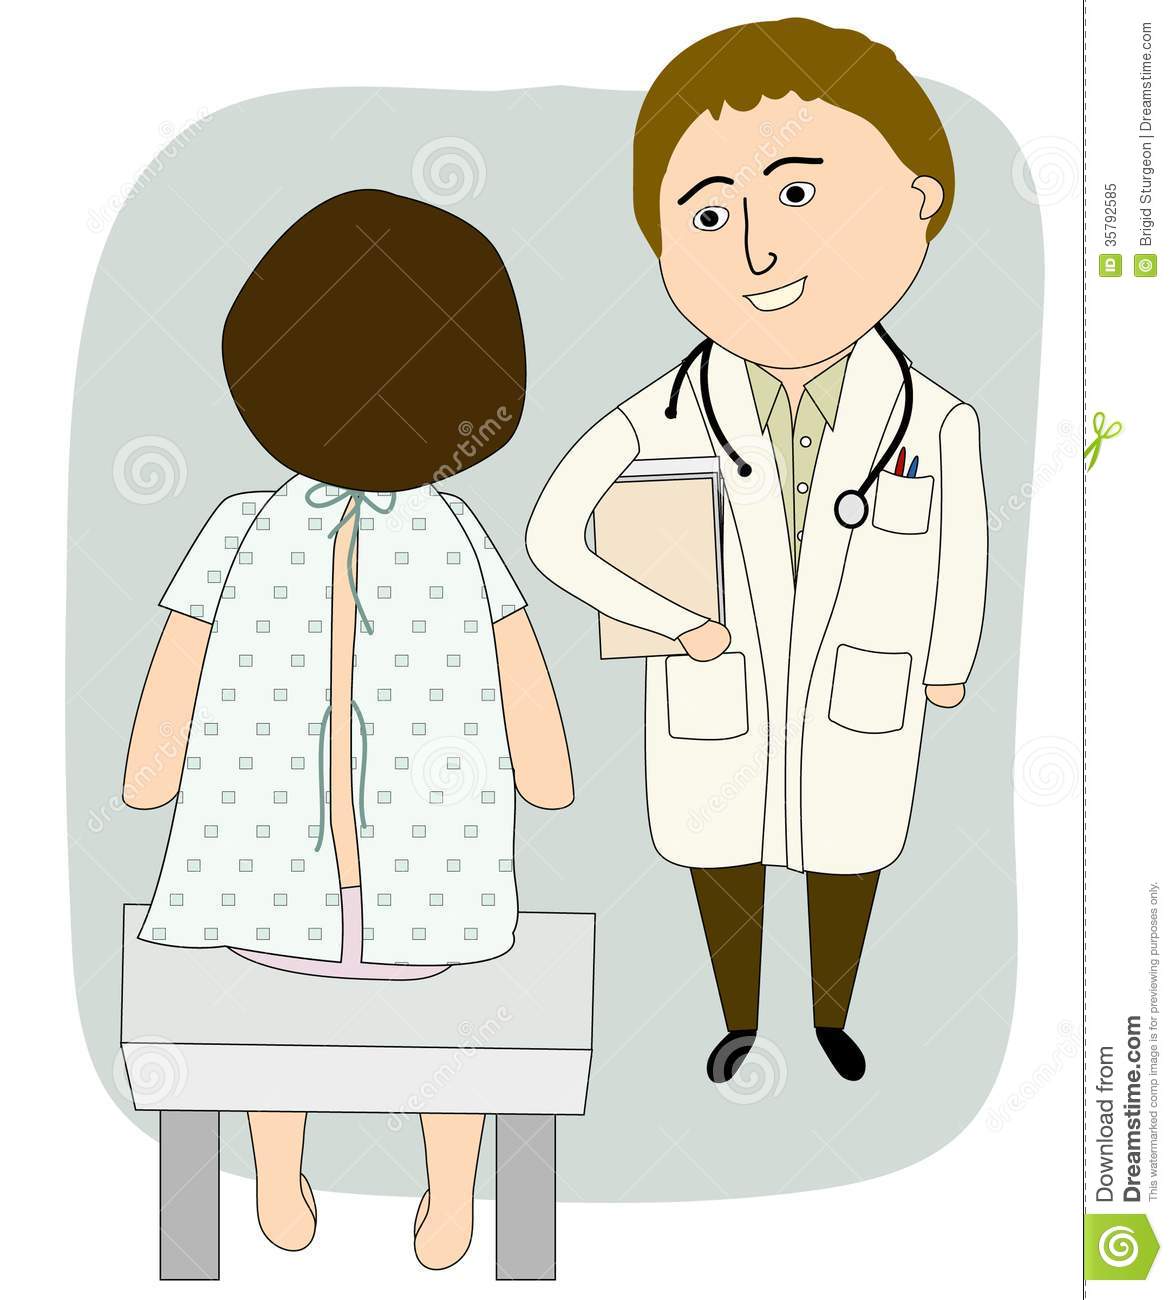 Doctor Talking To Patient Royalty Free Stock Photo   Image  35792585